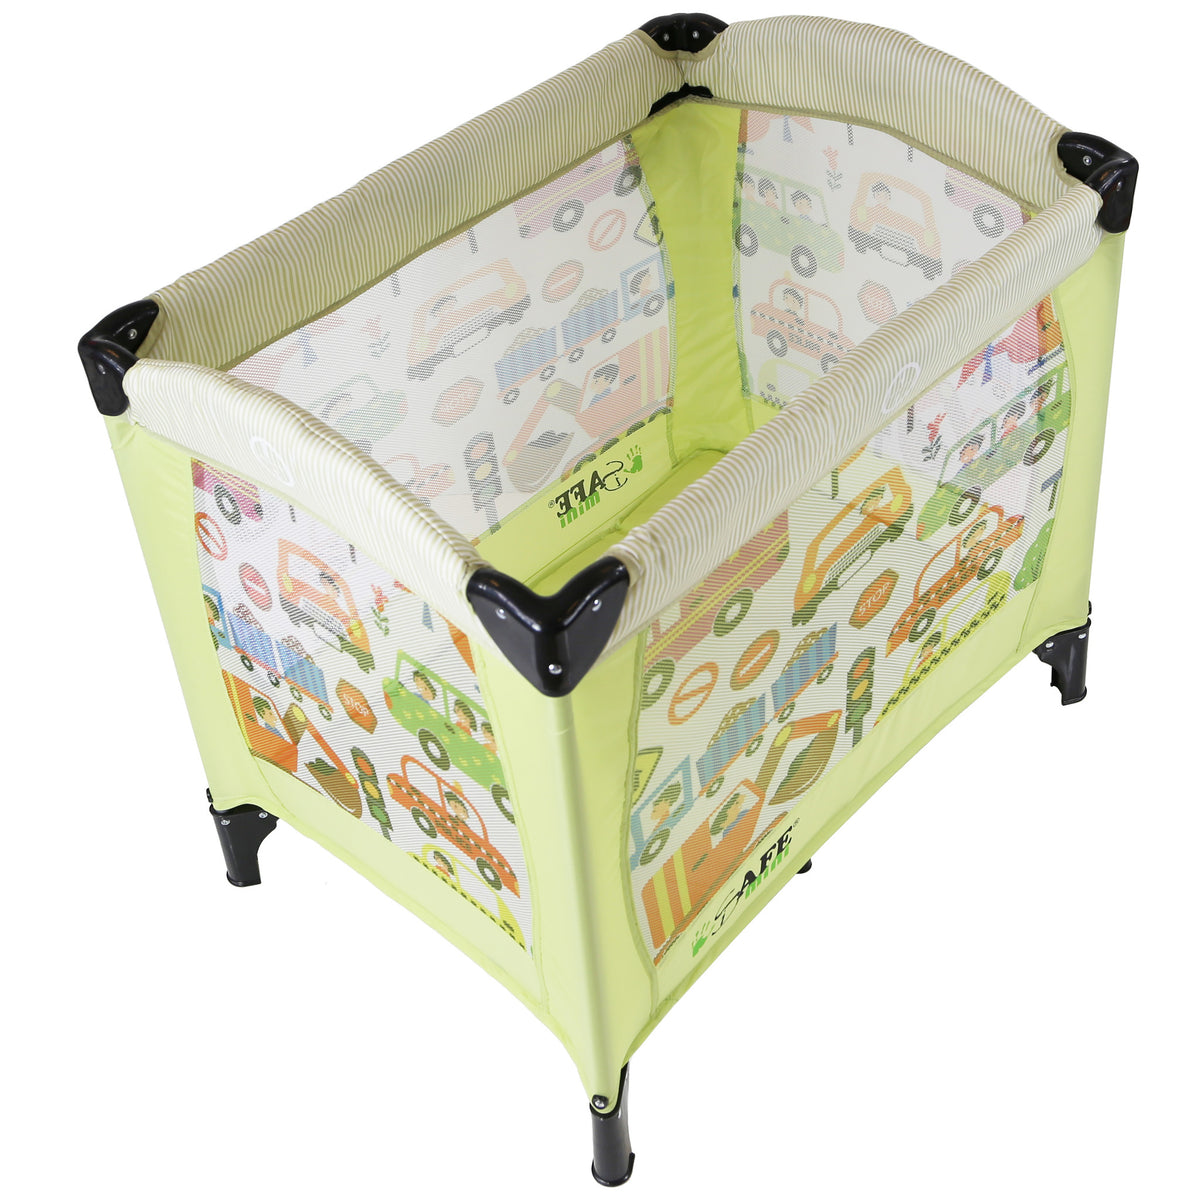 Smiley And Cuddly 81 x 56 x 84 cm Complete With Mattress iSafe Mini Travel Cot With Bassinet And Canopy